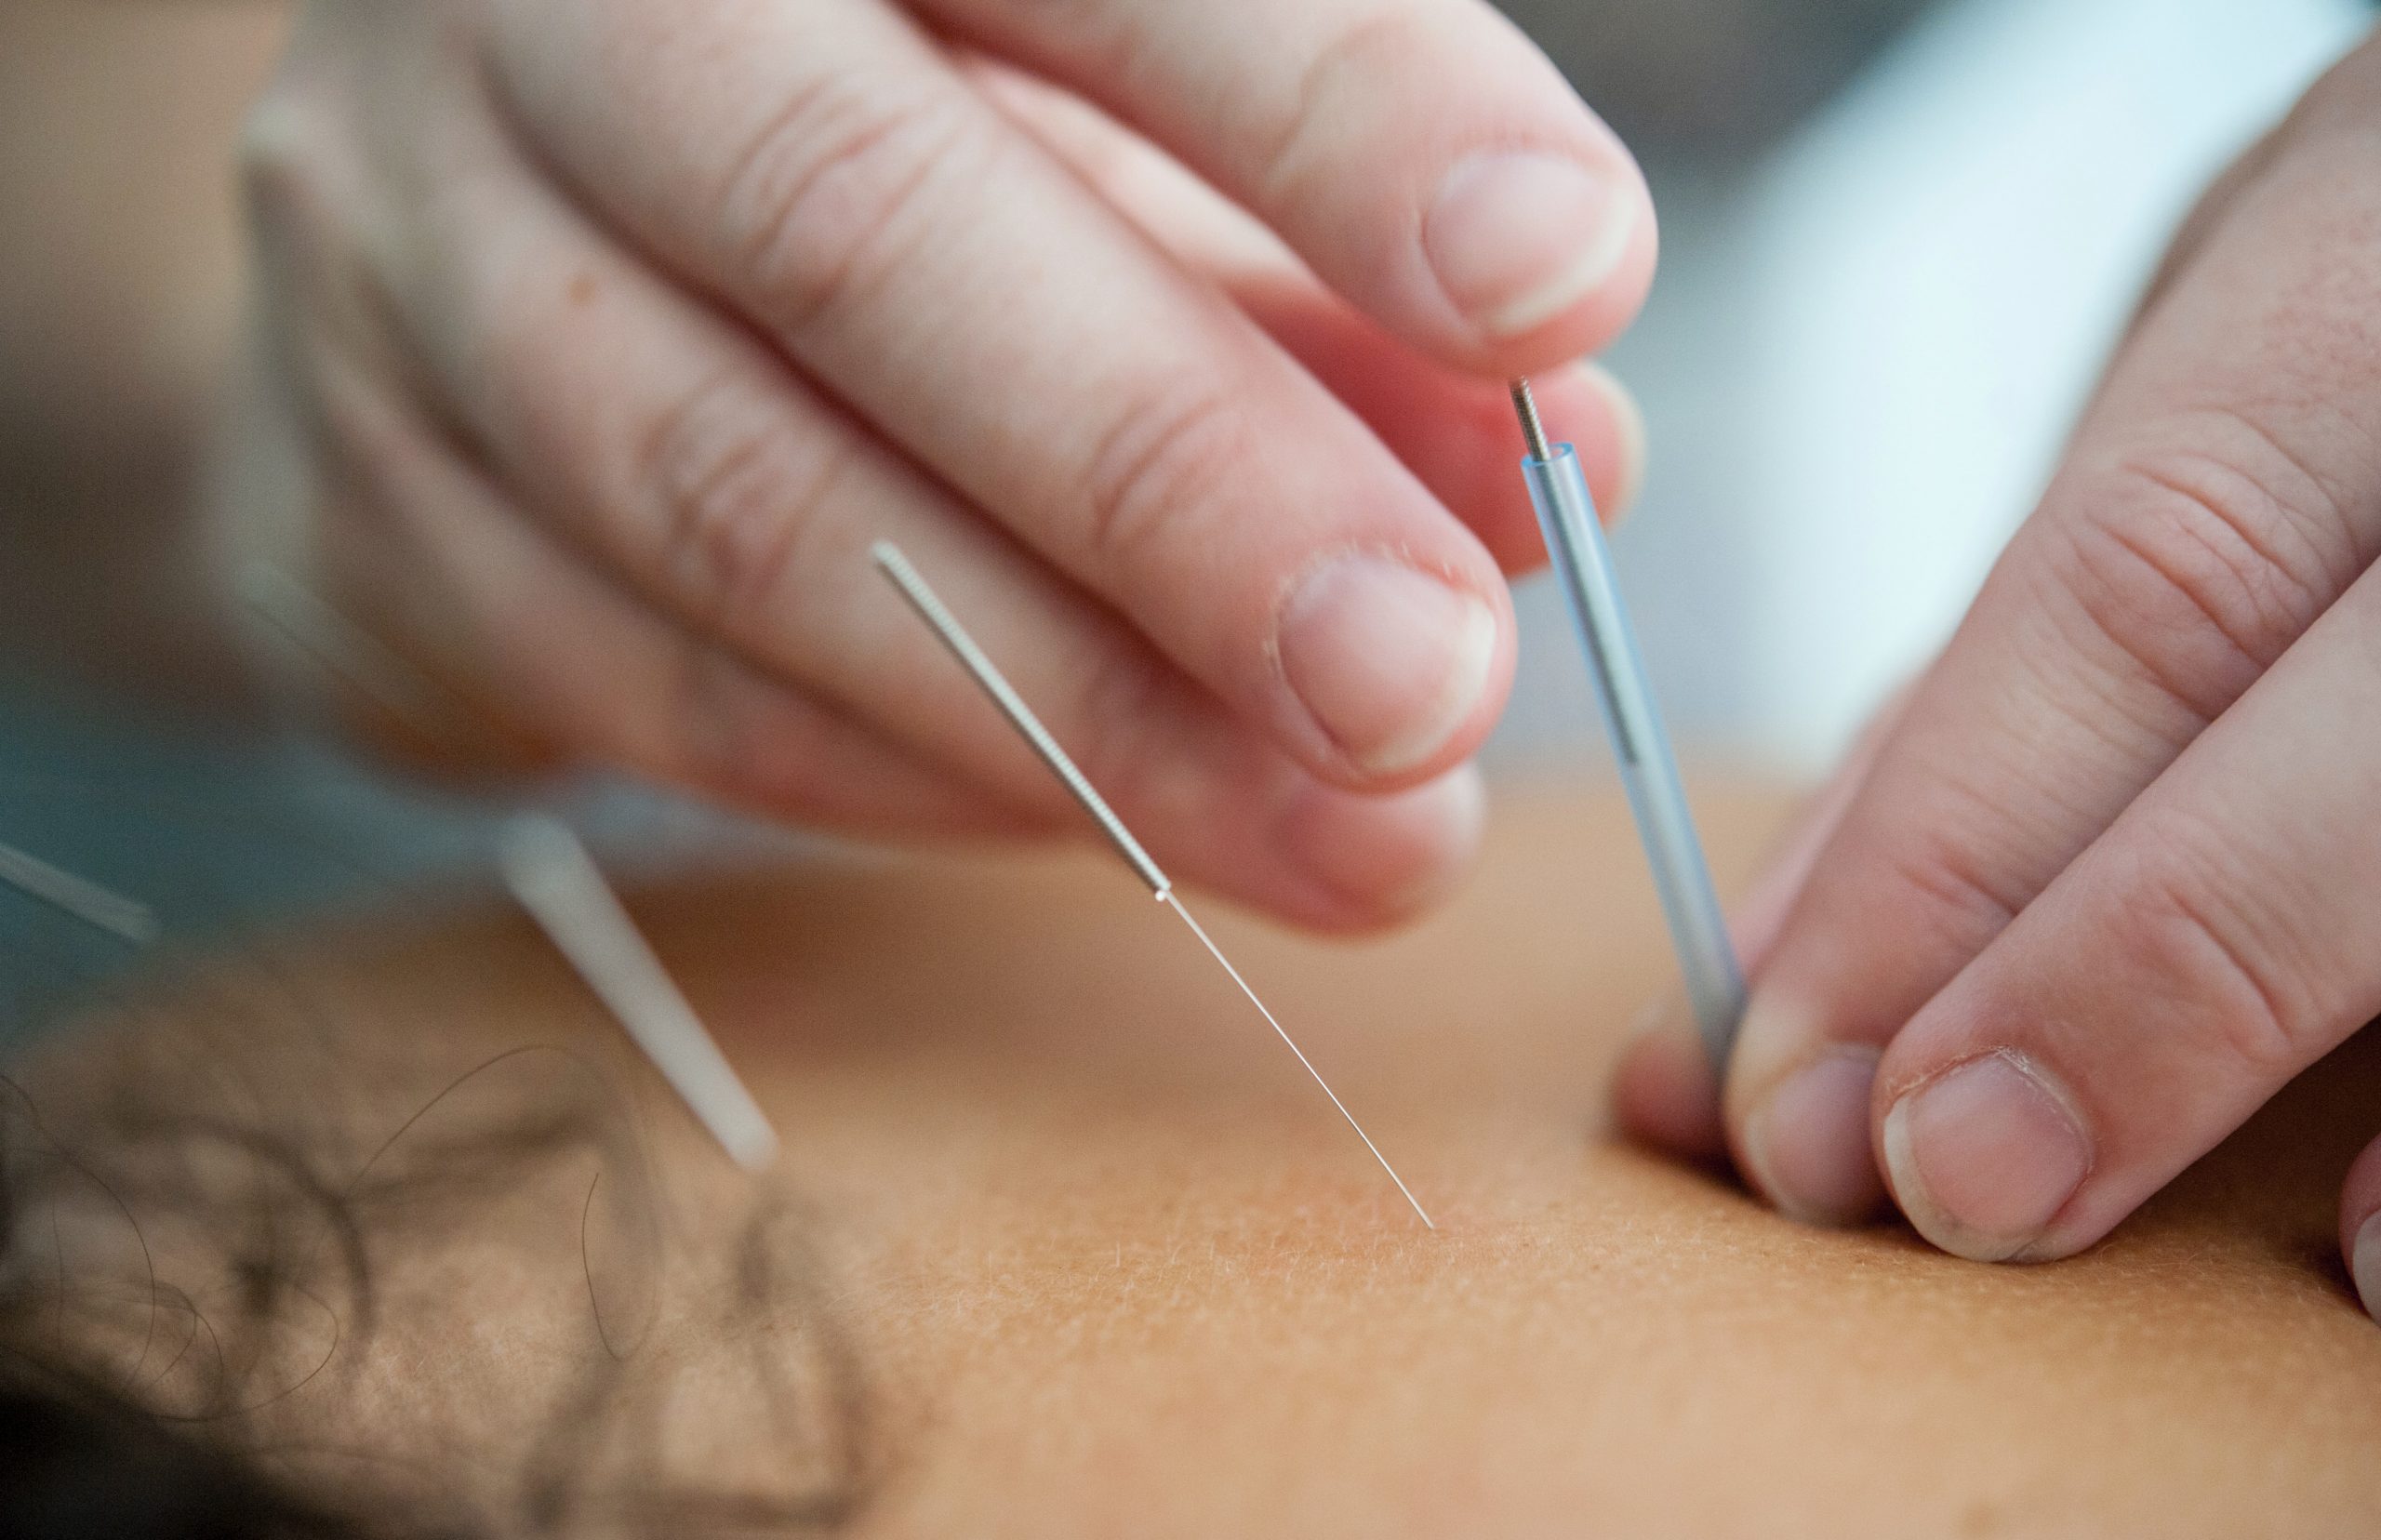 For The Uninitiated We Offer A Step By Step Connection With Tui And Acupuncture